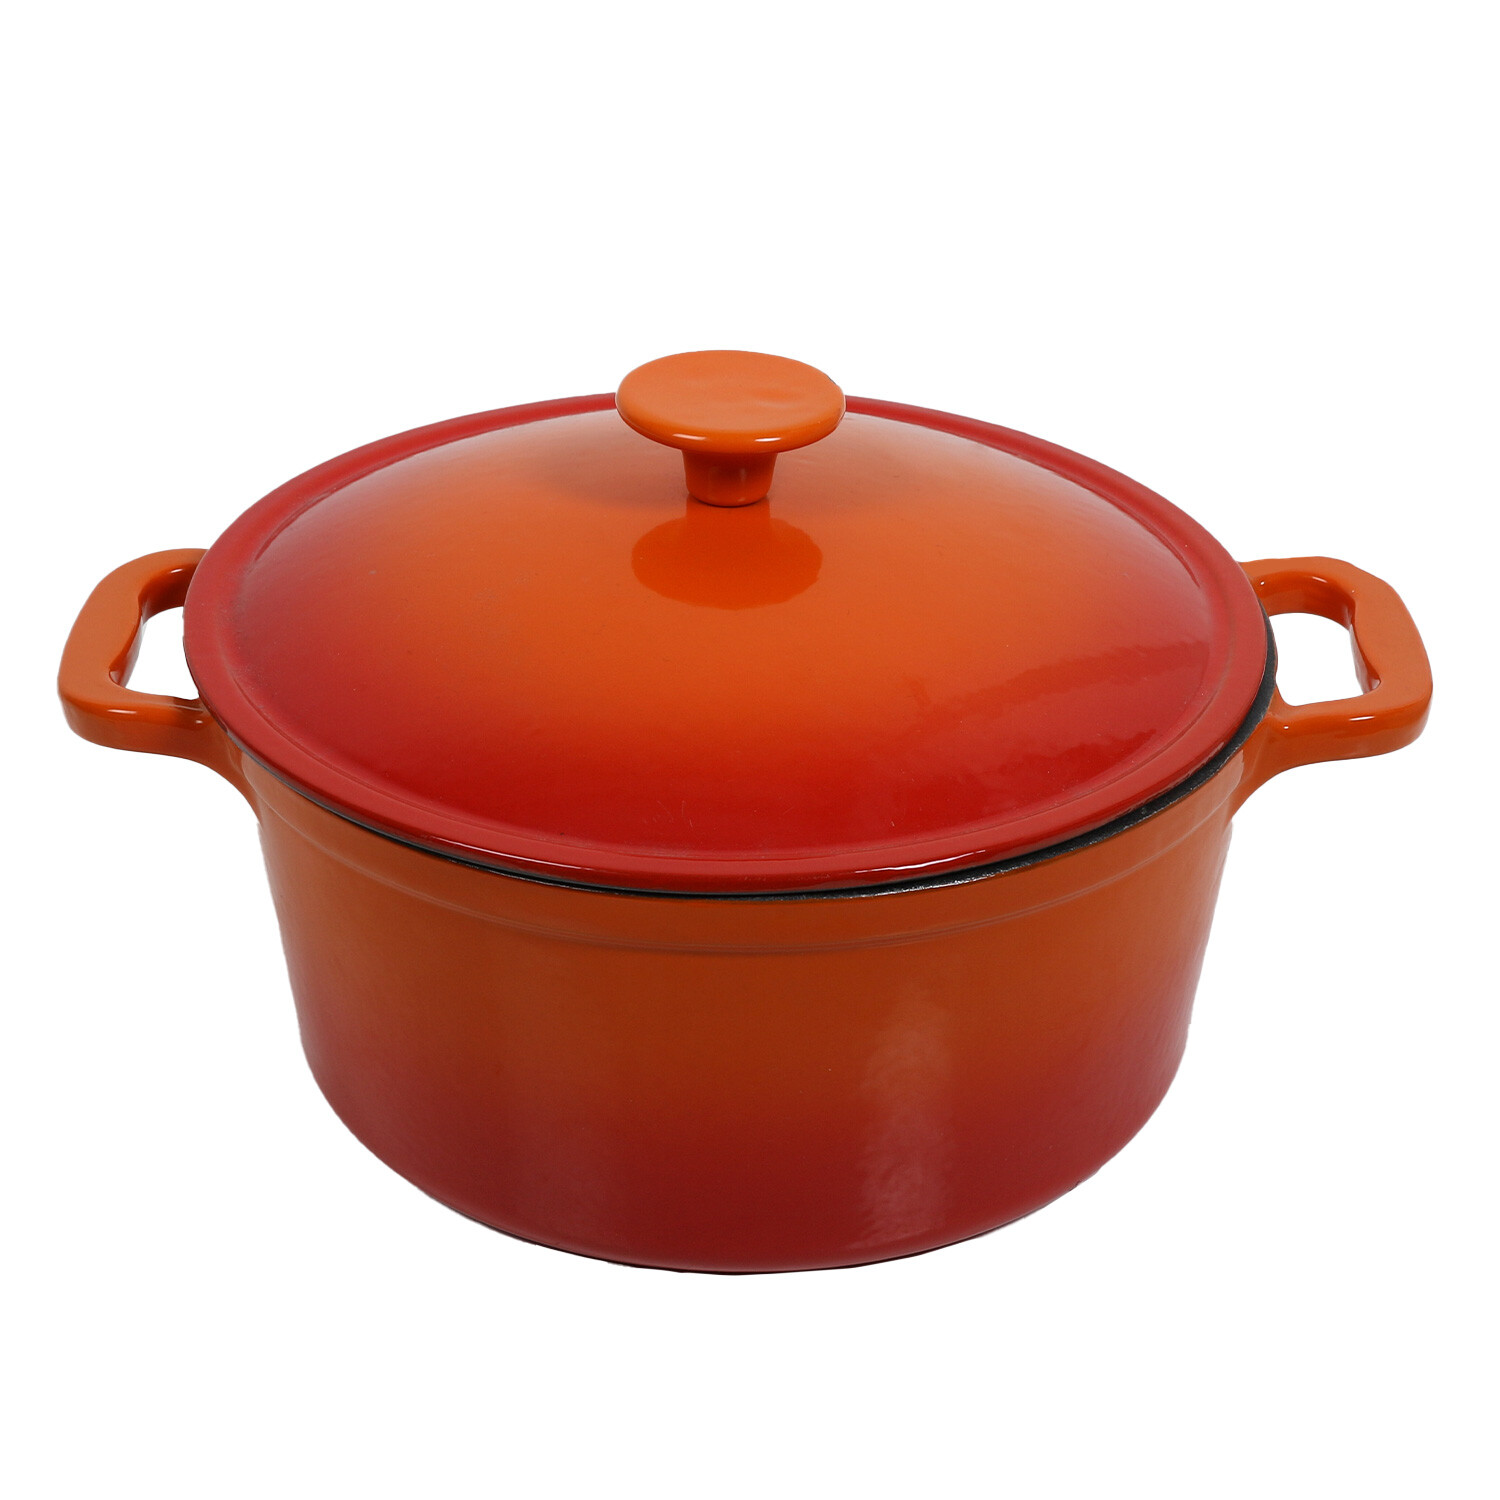 Red Round Casserole Dish with Lid Image